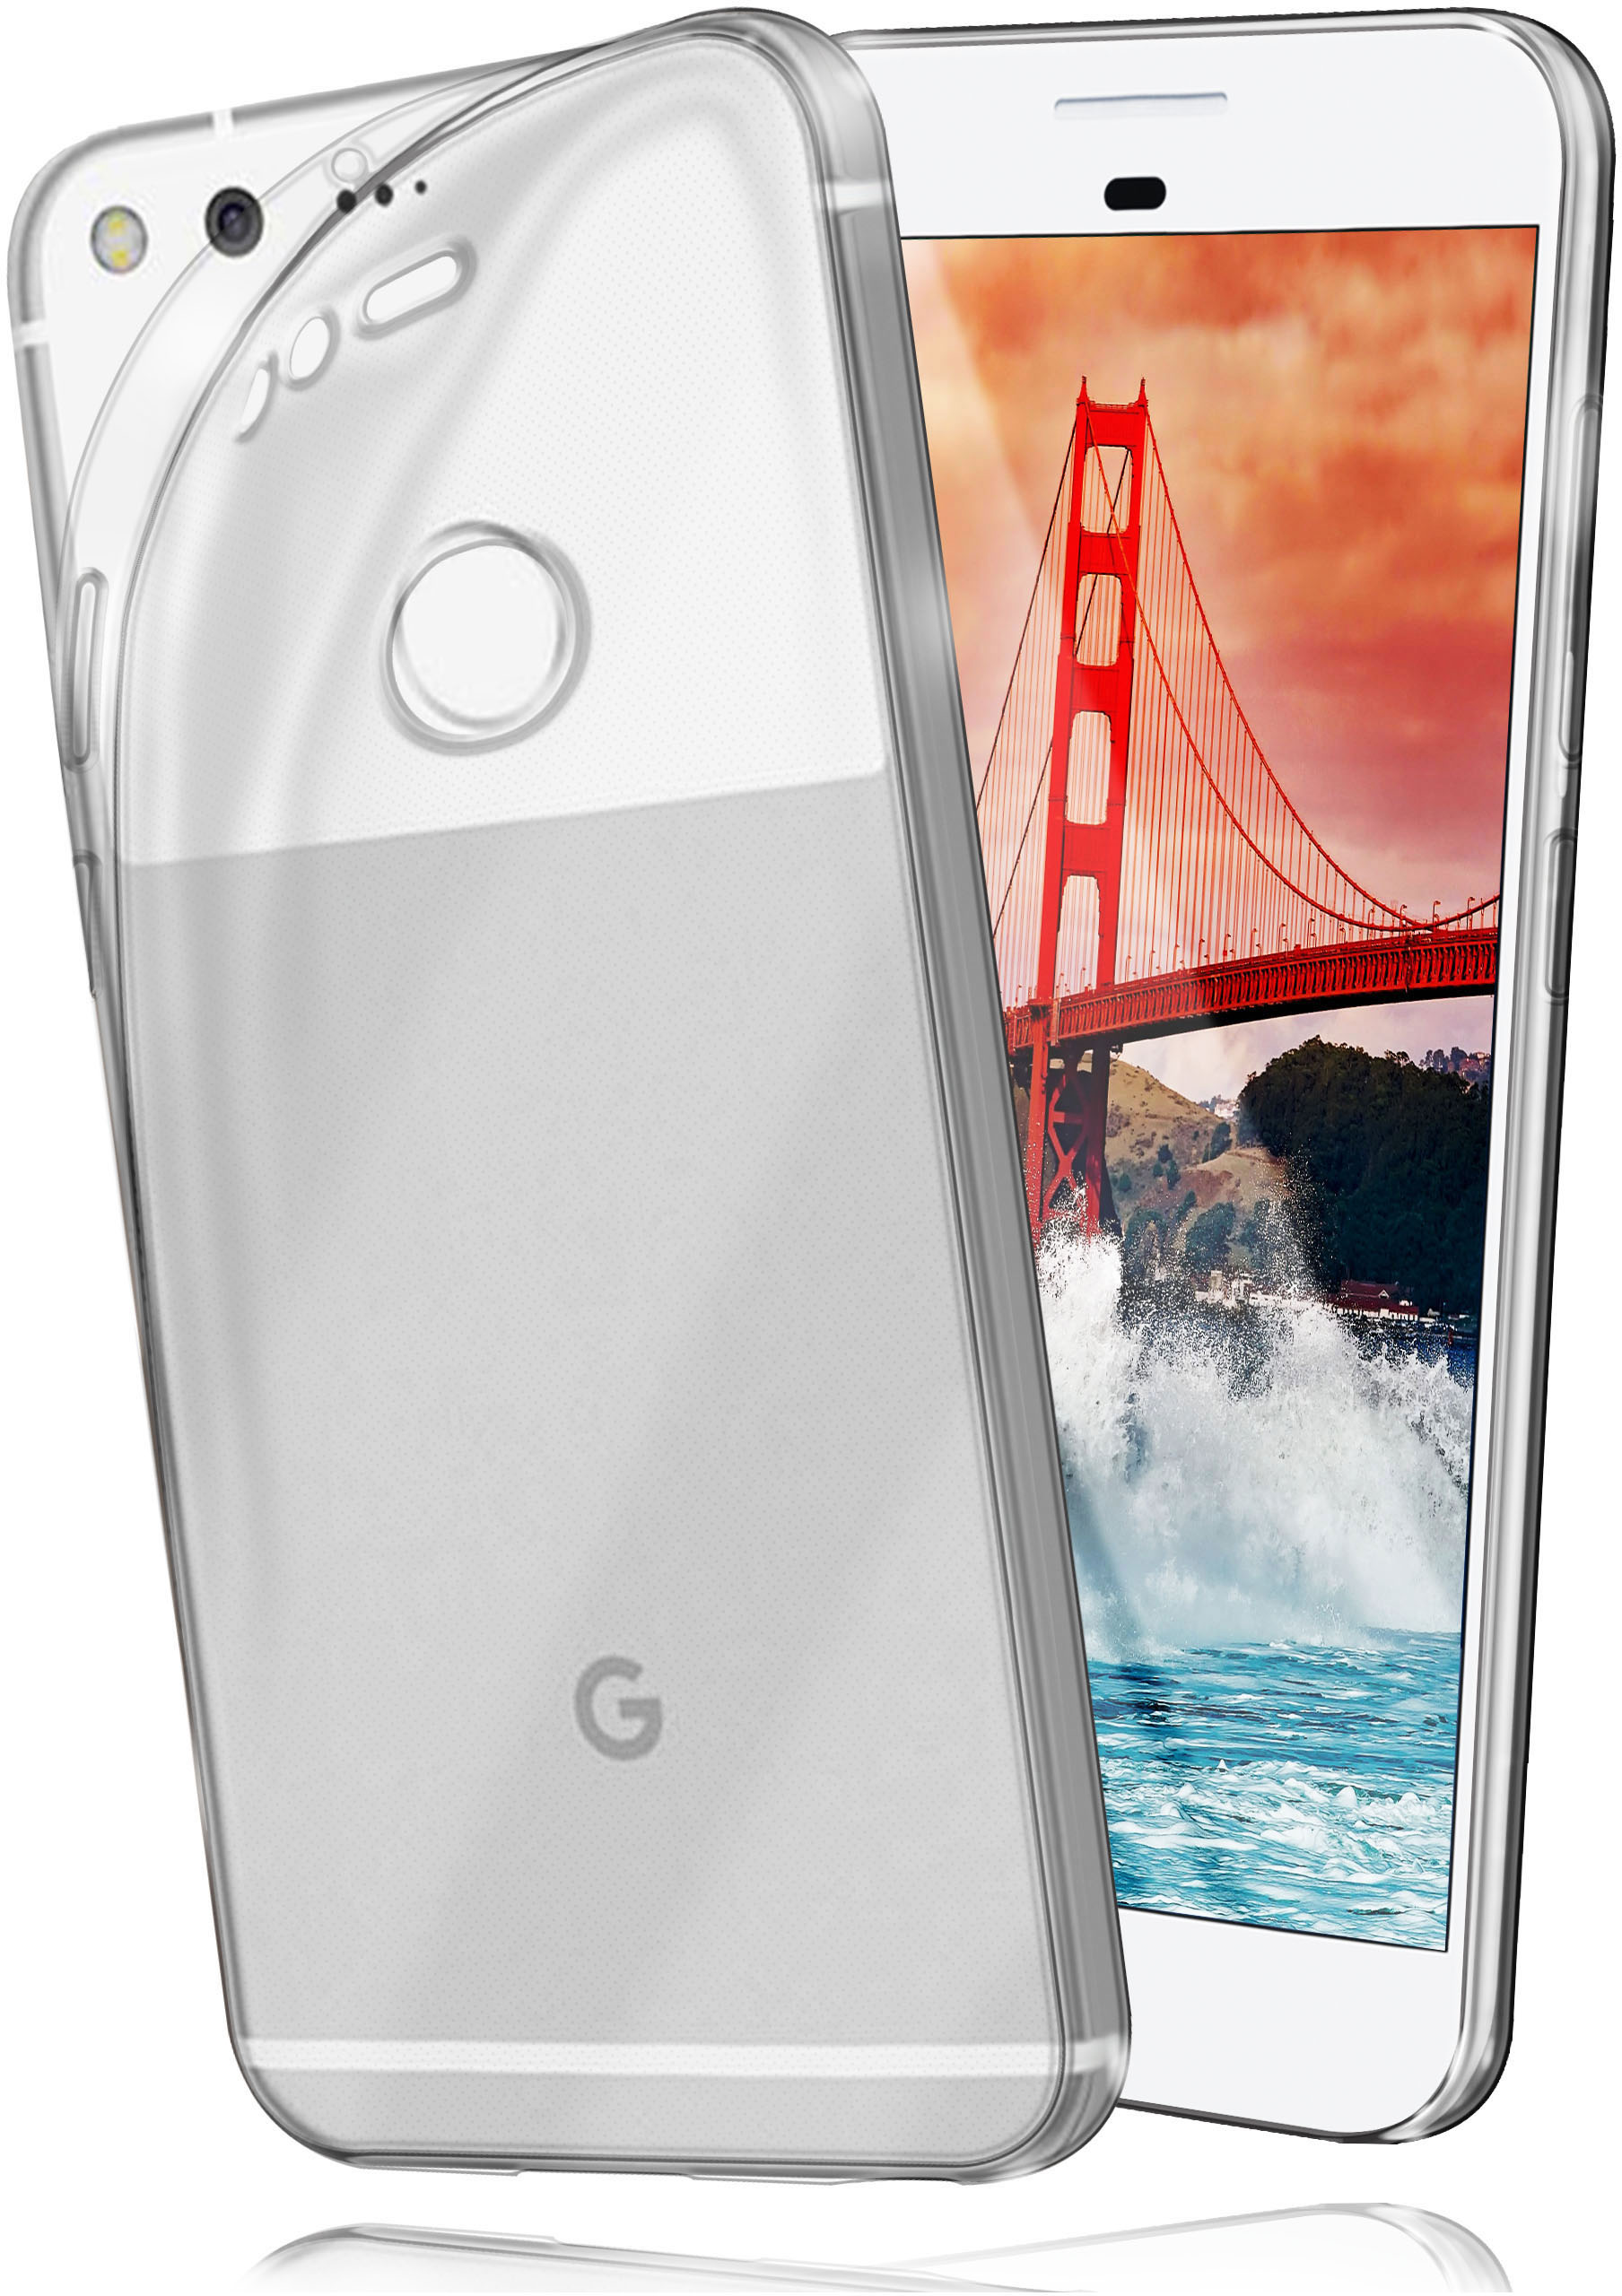 Case, Backcover, Crystal-Clear Aero Pixel, Google, MOEX